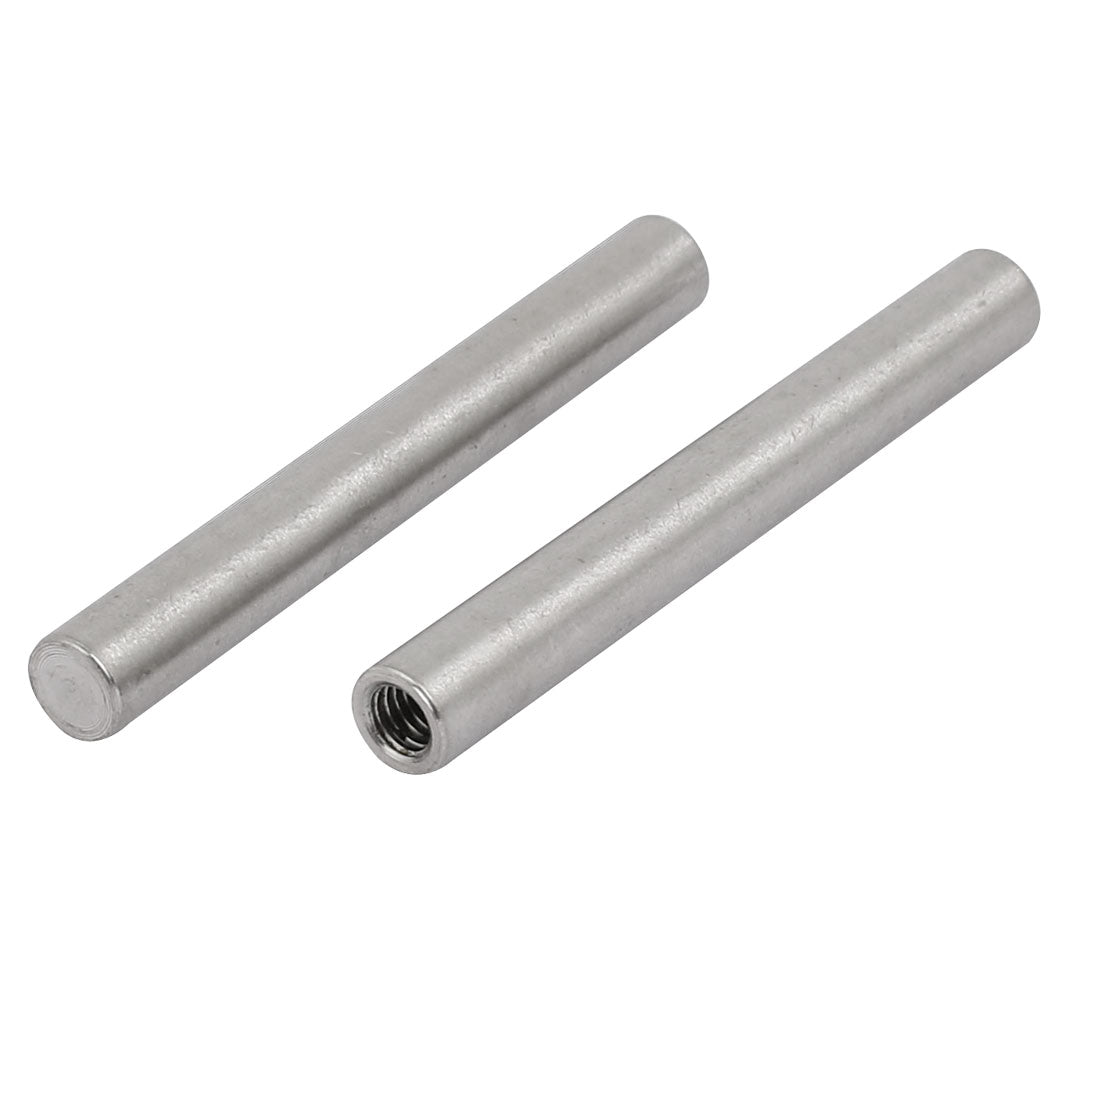 uxcell Uxcell 304 Stainless Steel M4 Female Thread 6mm x 50mm Cylindrical Dowel Pin 6pcs